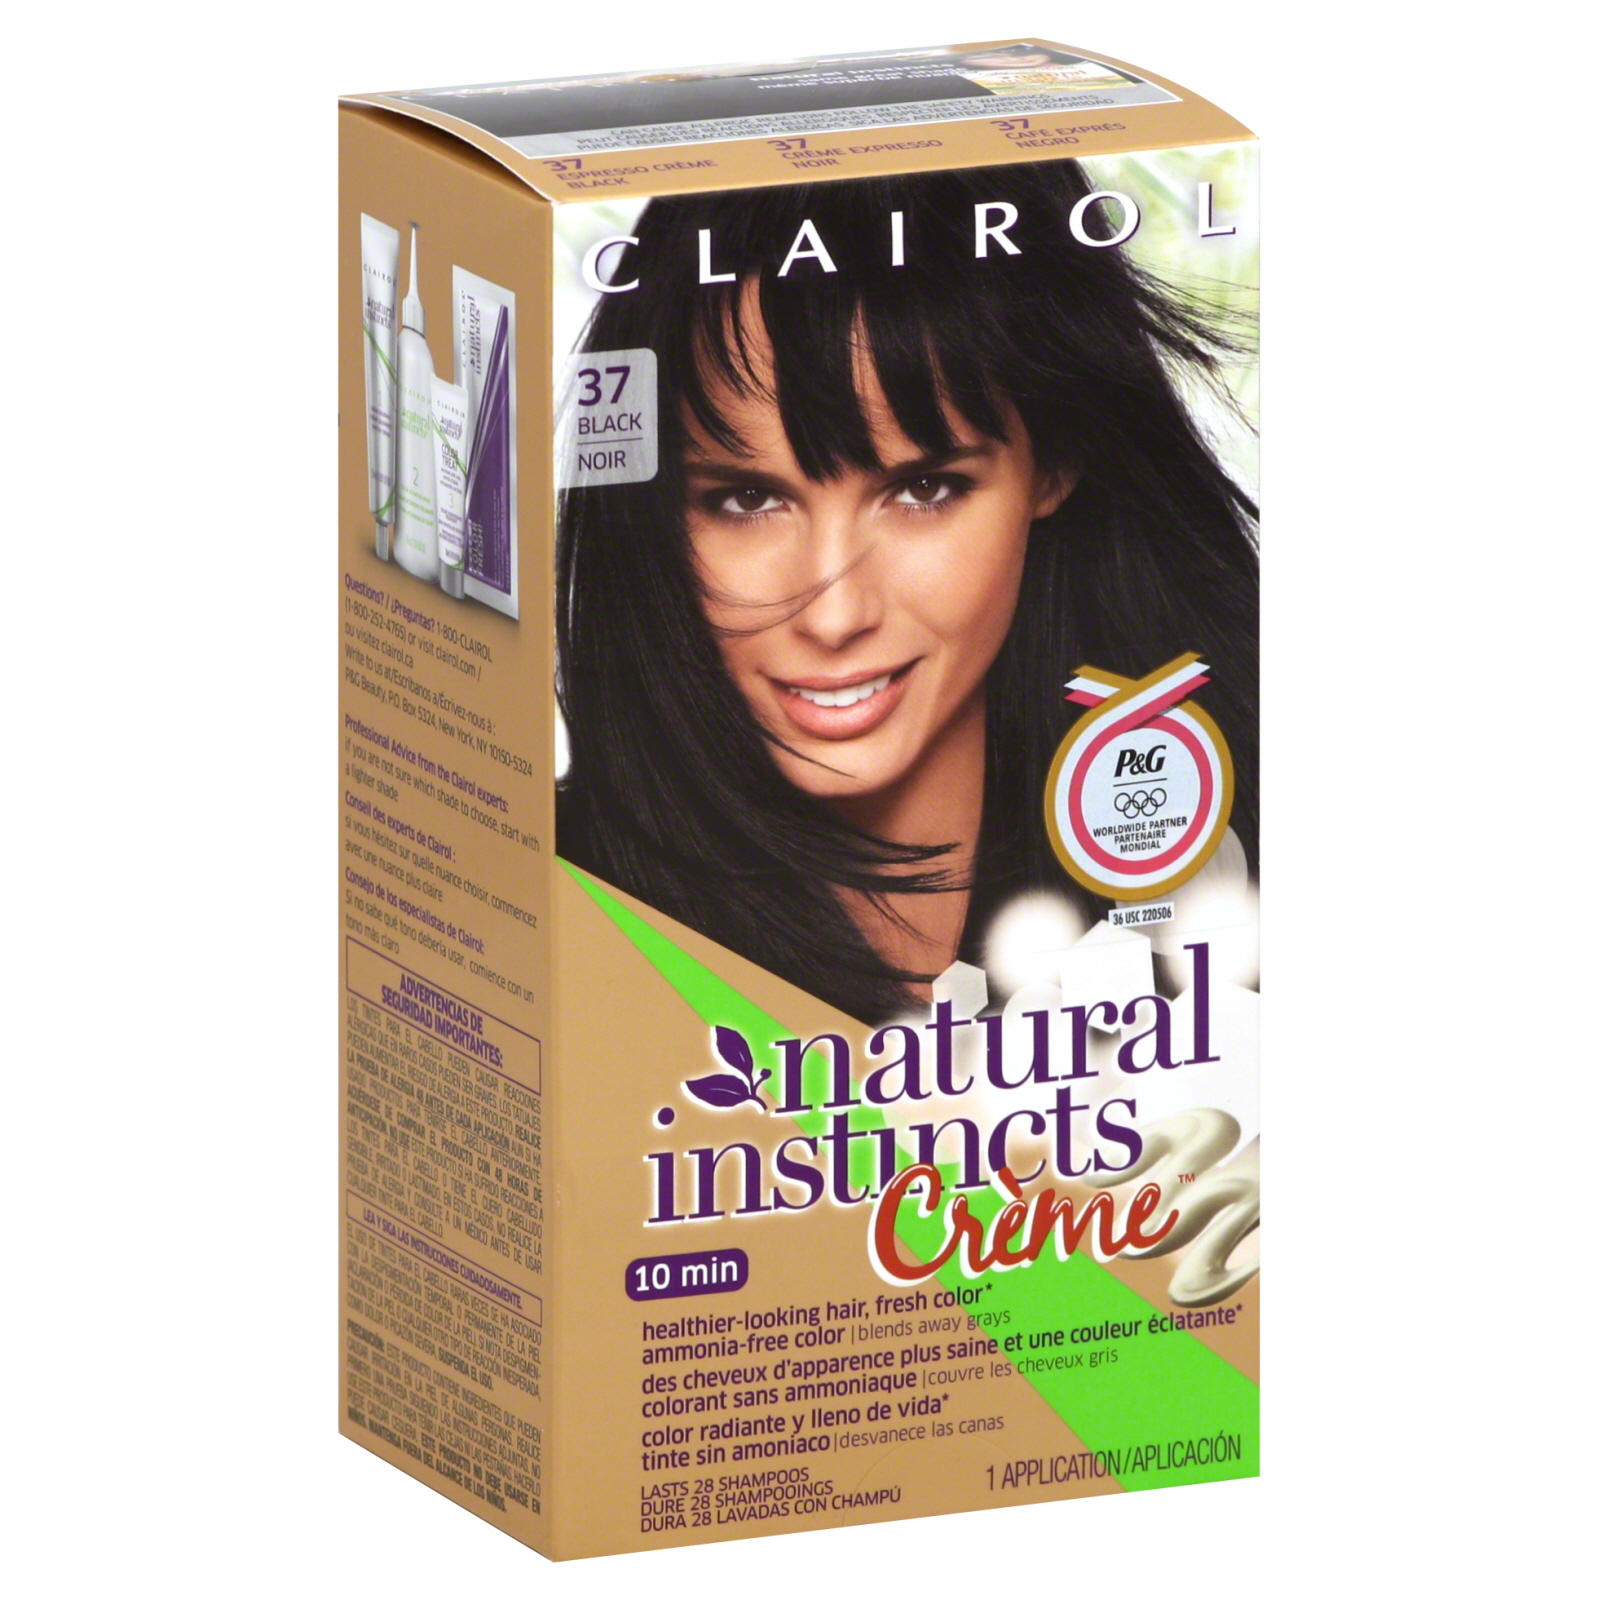 Clairol Natural Instincts Creme Color, Ammonia-Free, Black 37, 1 application